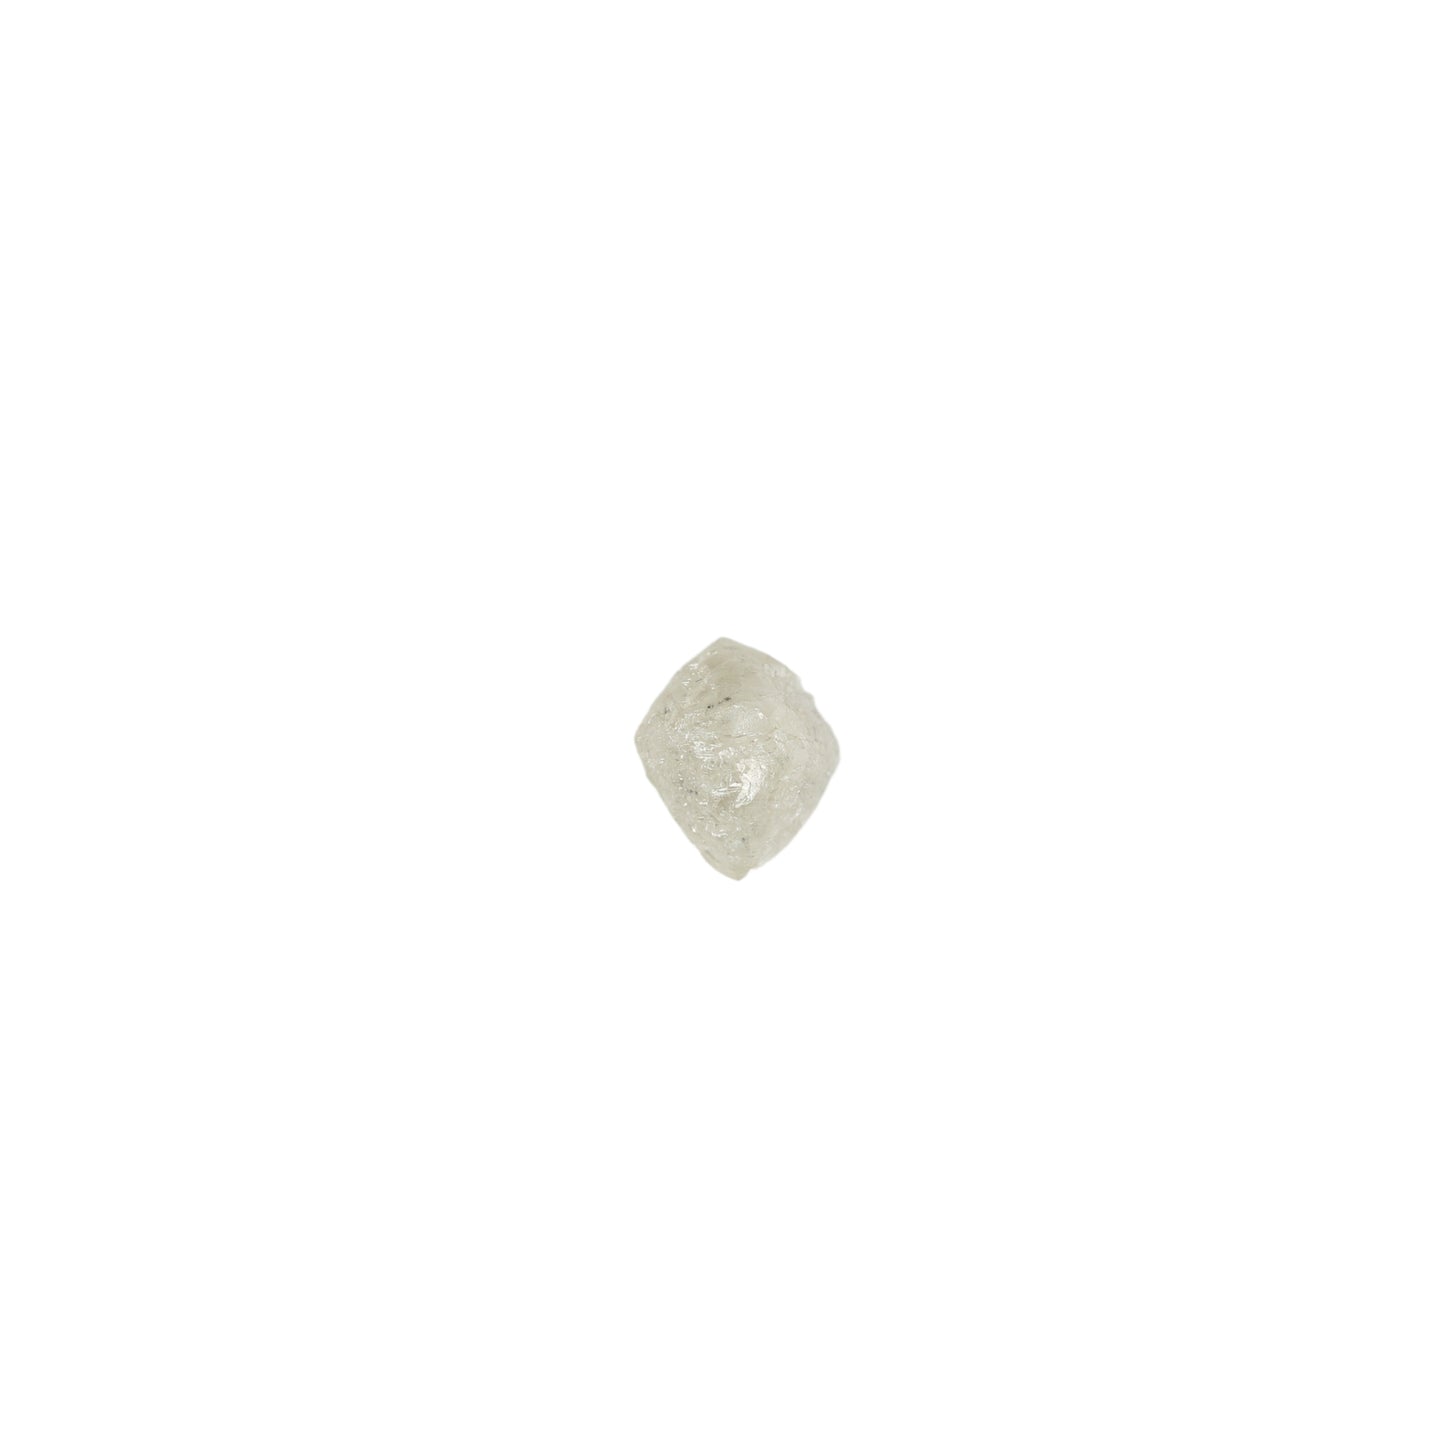 1.70 CT Snow White Loose Rough Uncut Diamond For Wedding Ring | Wedding Jewelry | Gift For Daughter | Gift For Sister